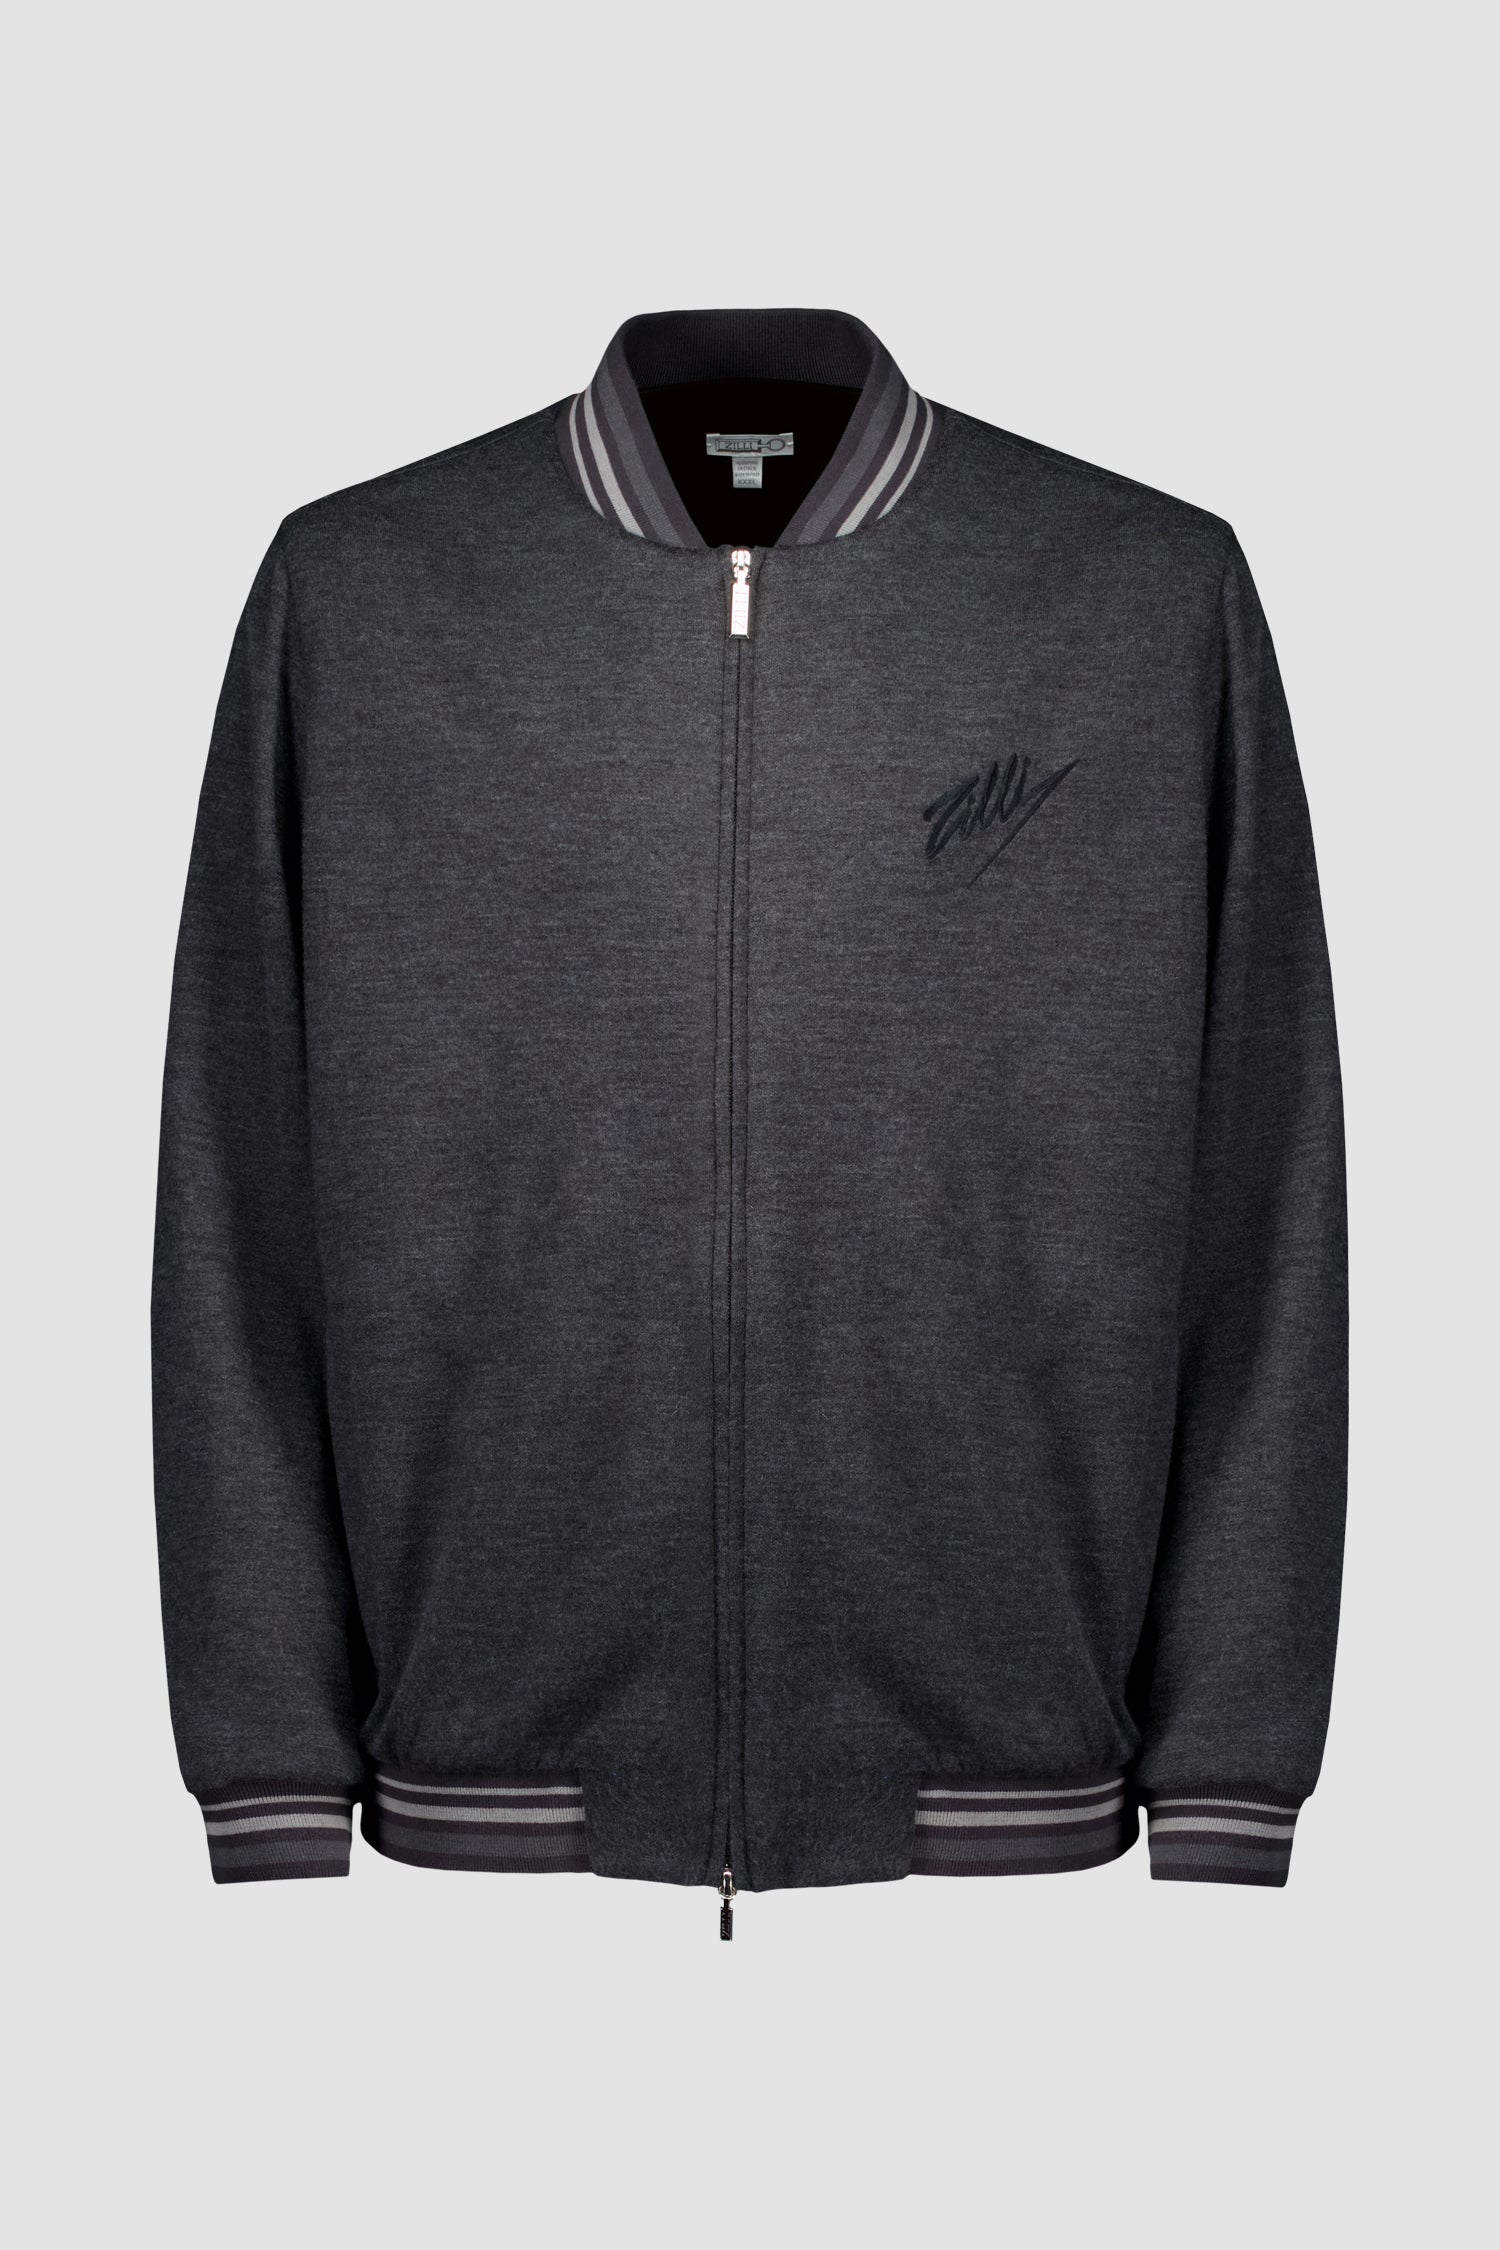 Zilli Grey Signature Embroidery Bomber